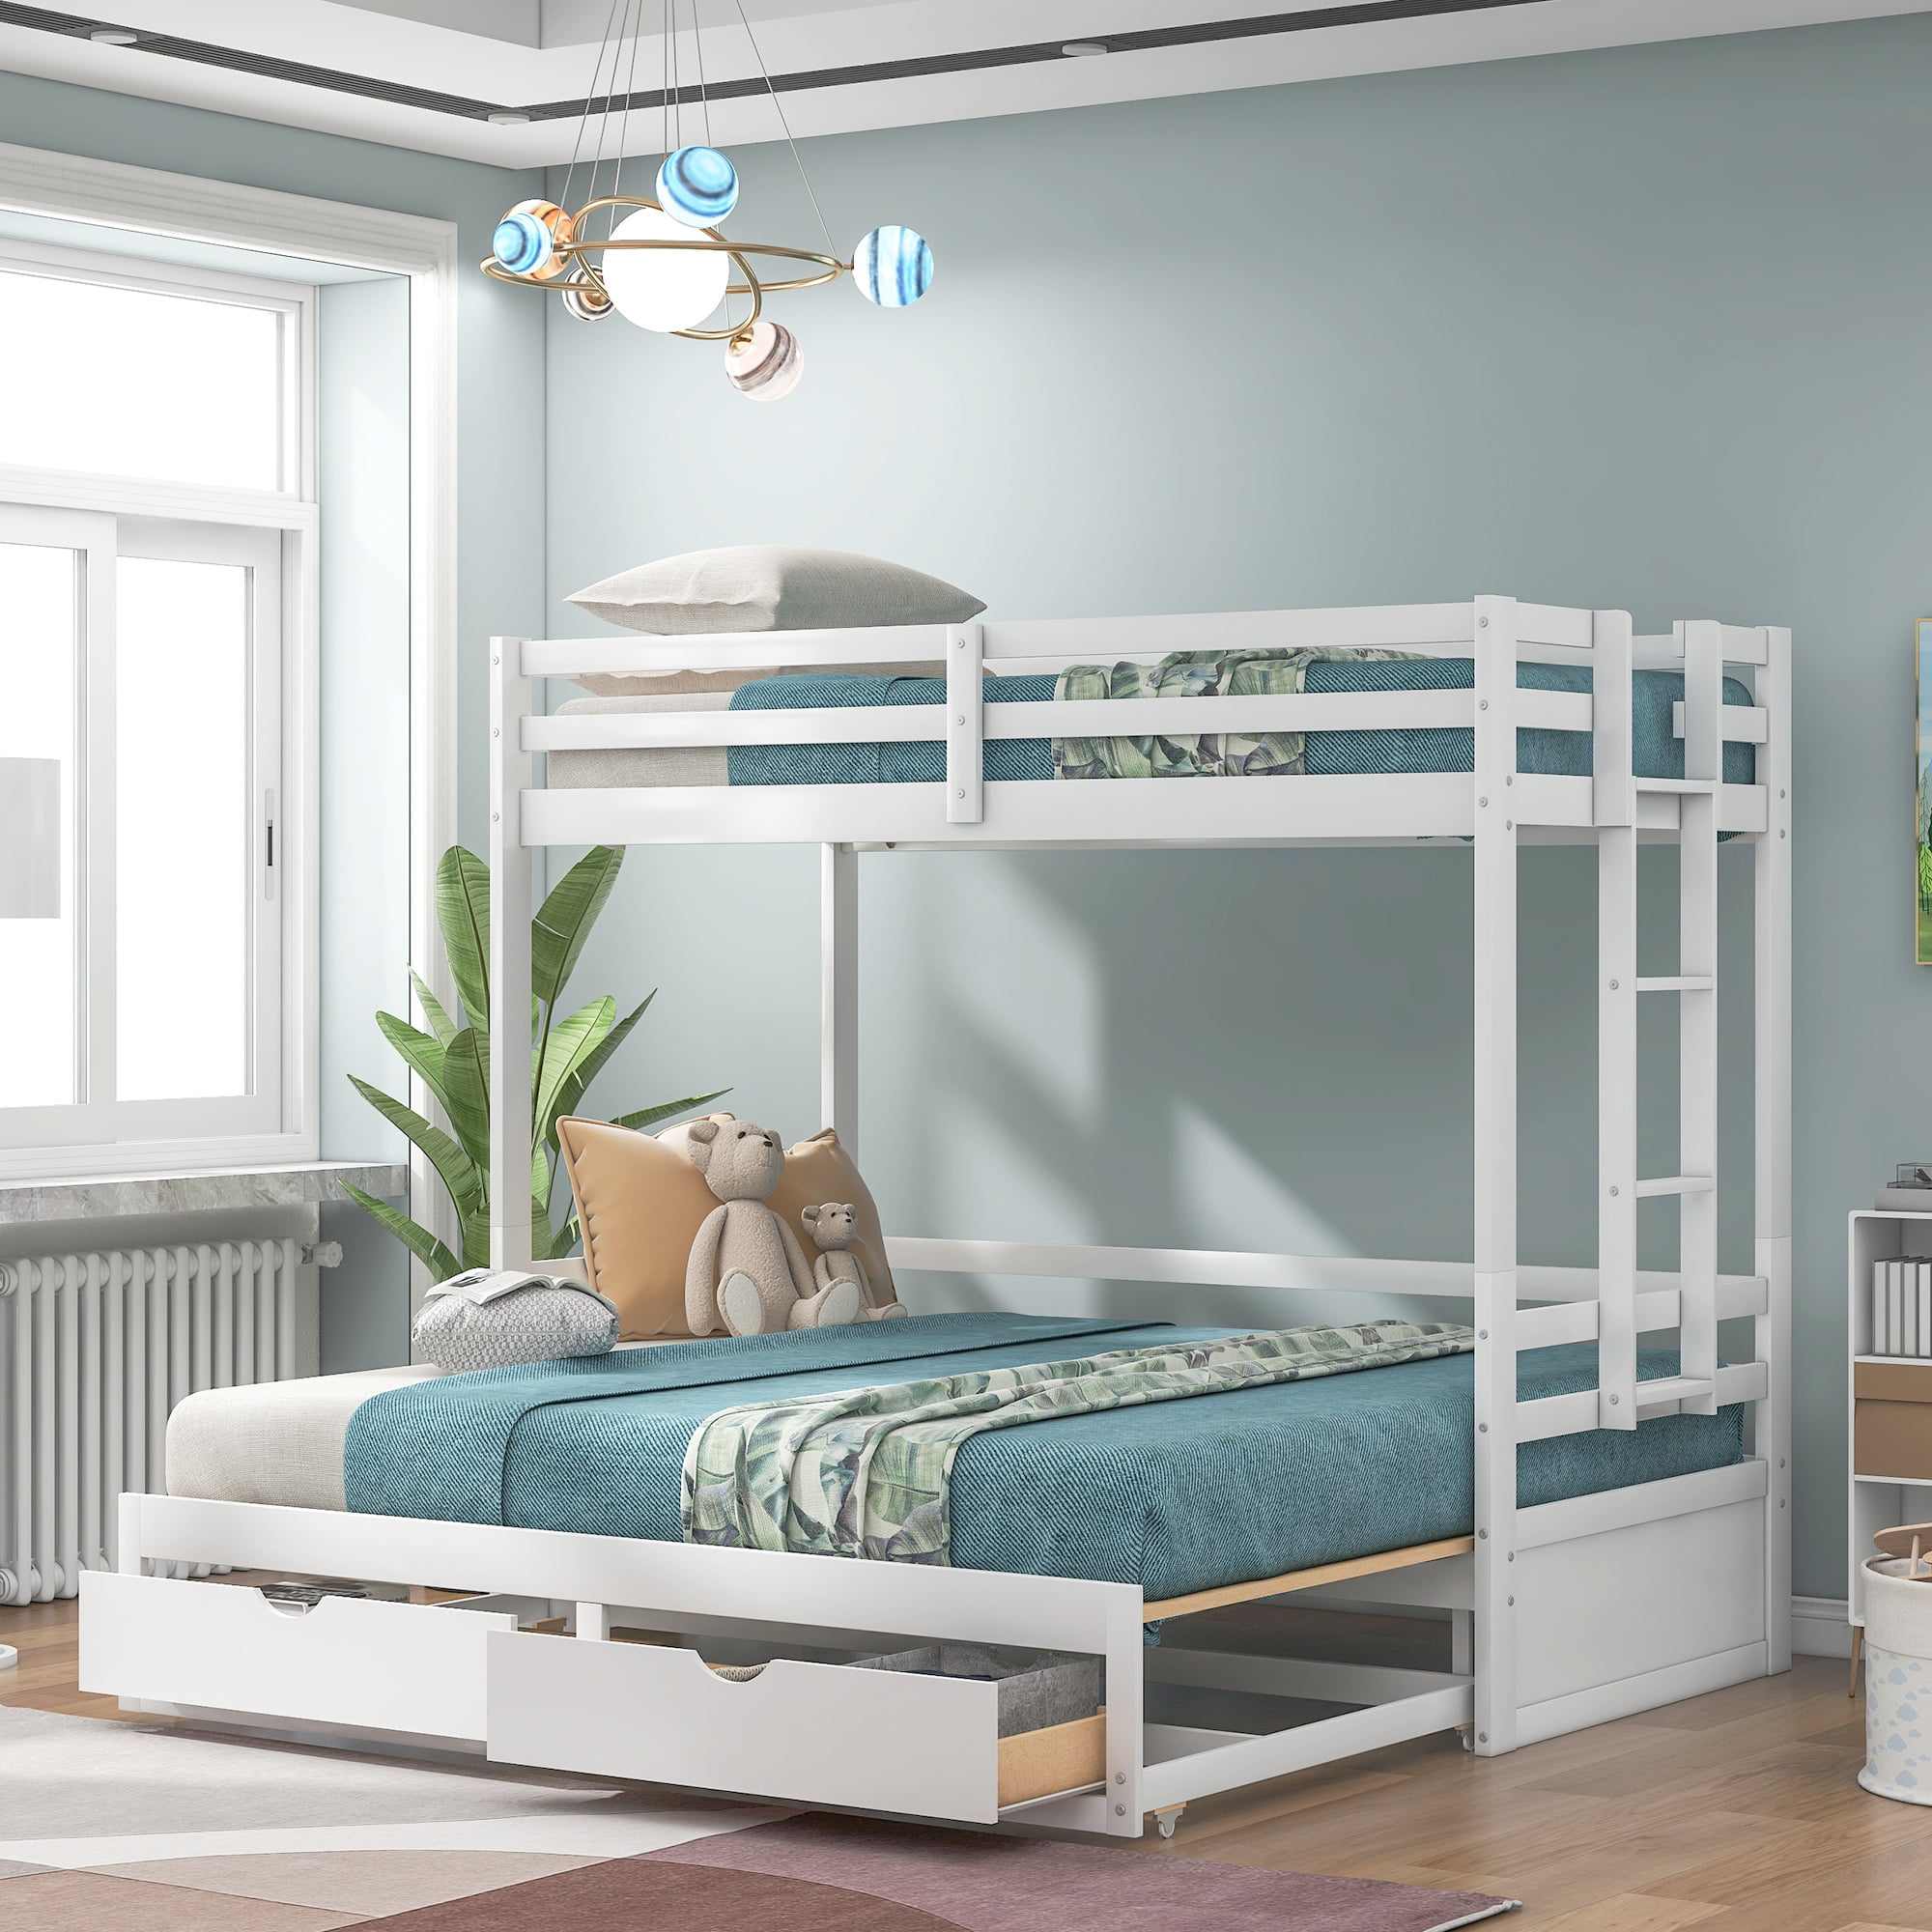 Twin To King Bunk Bed Wooden, Bunk Beds With Pull Out Bed Underneath